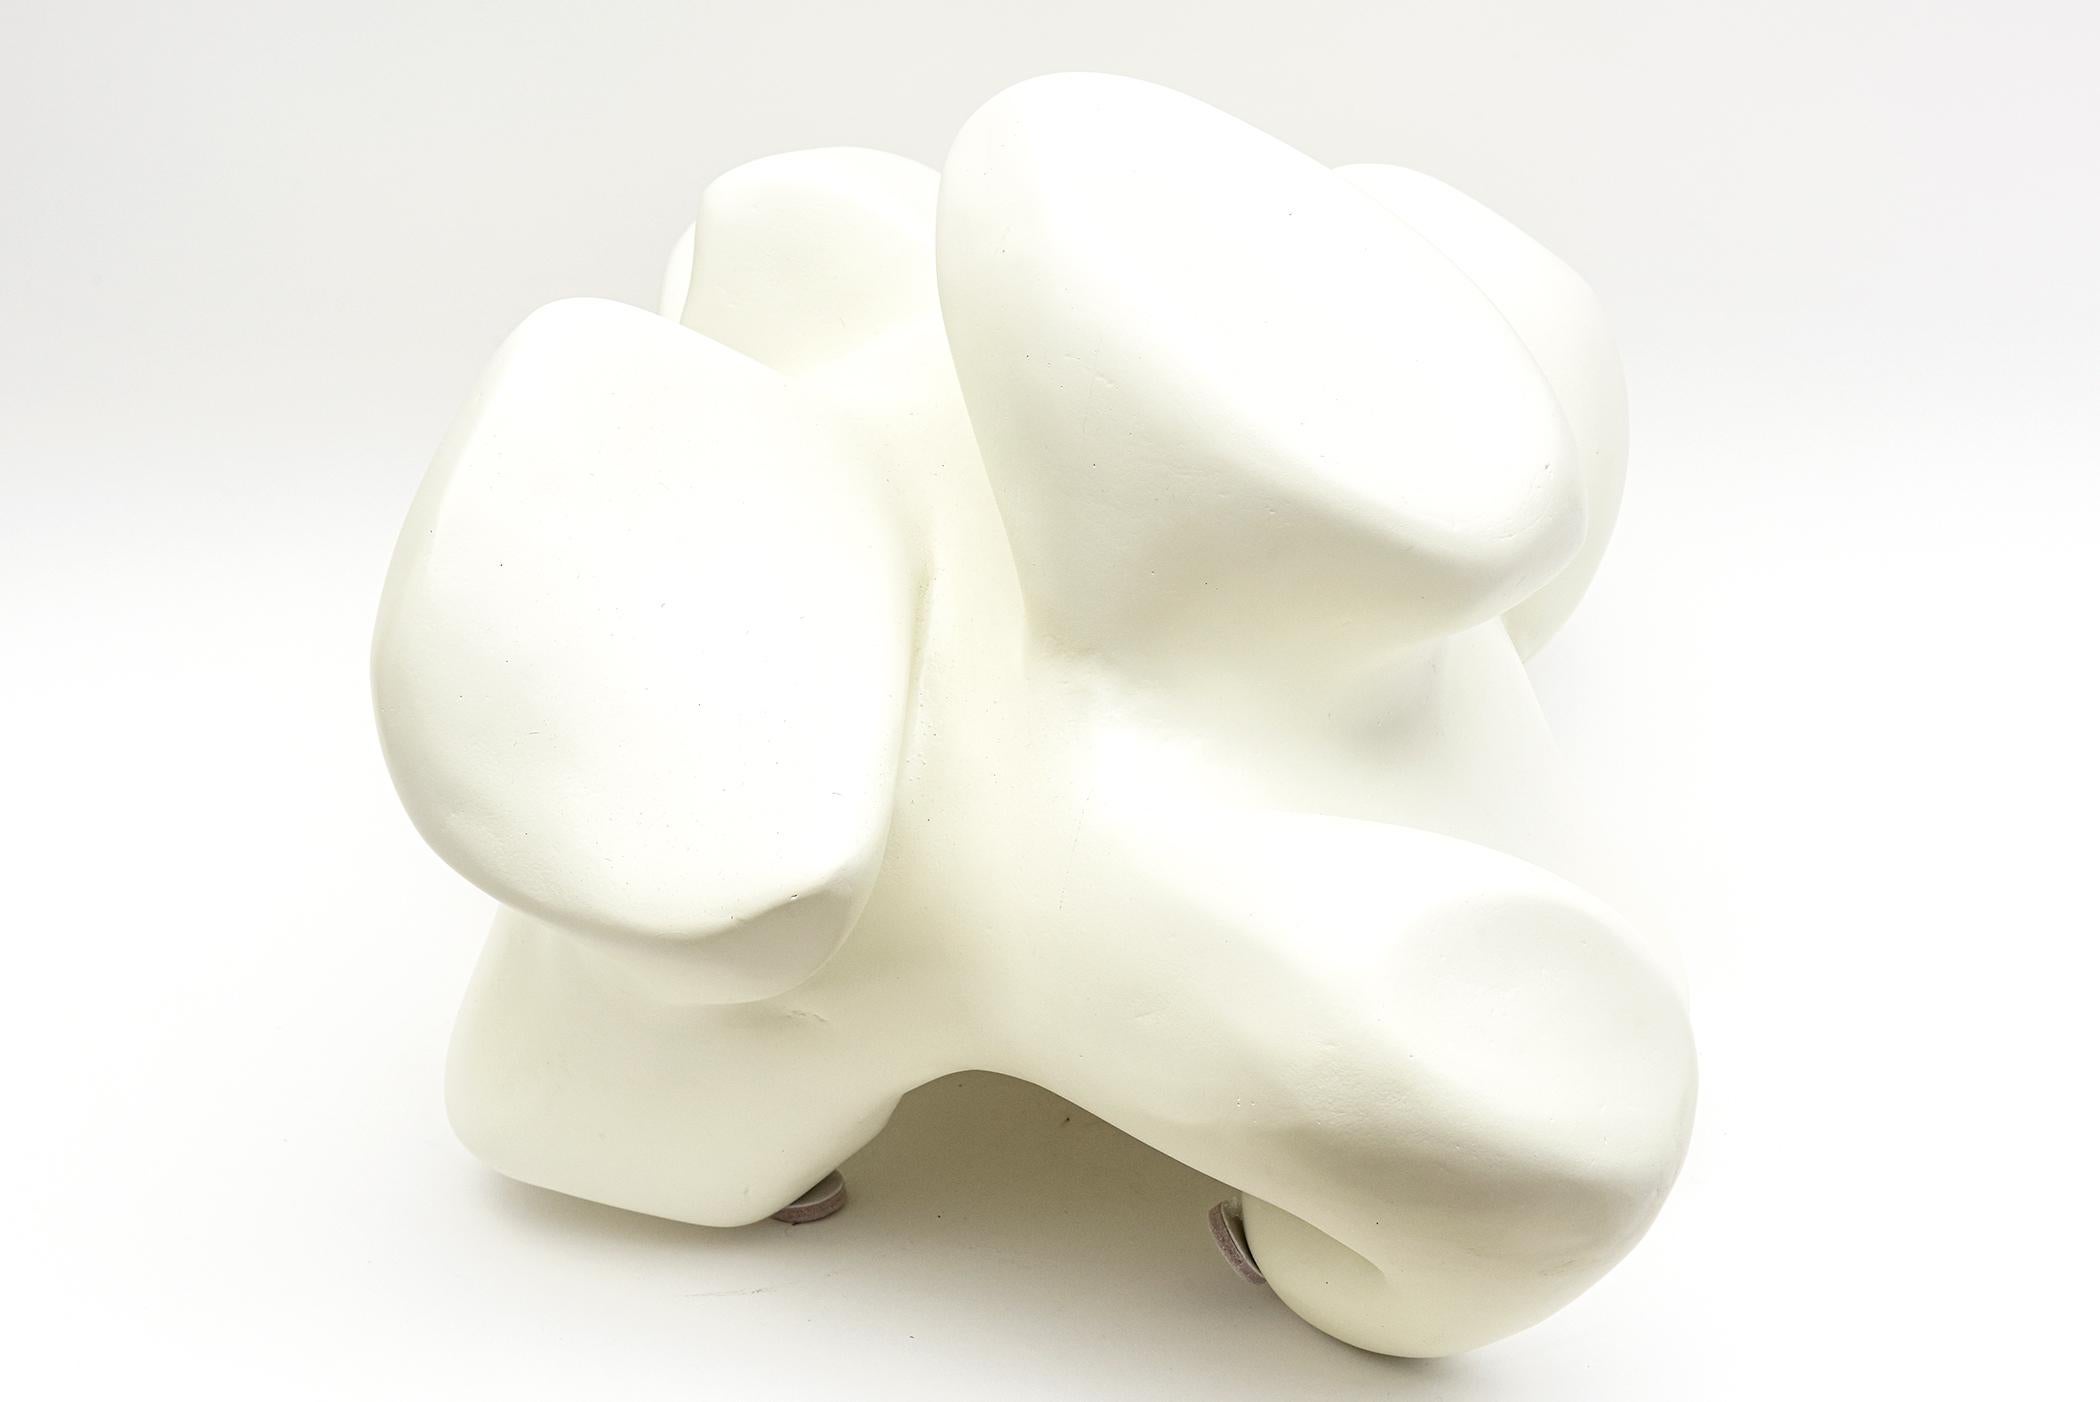 This most unusual off white fiberglass table top or wall mounted sculpture is by Jordan Mozer the designer of furniture and objects. It is from around 2012. It has protrusions of forms indifferent heights and shapes. As you turn it it changes